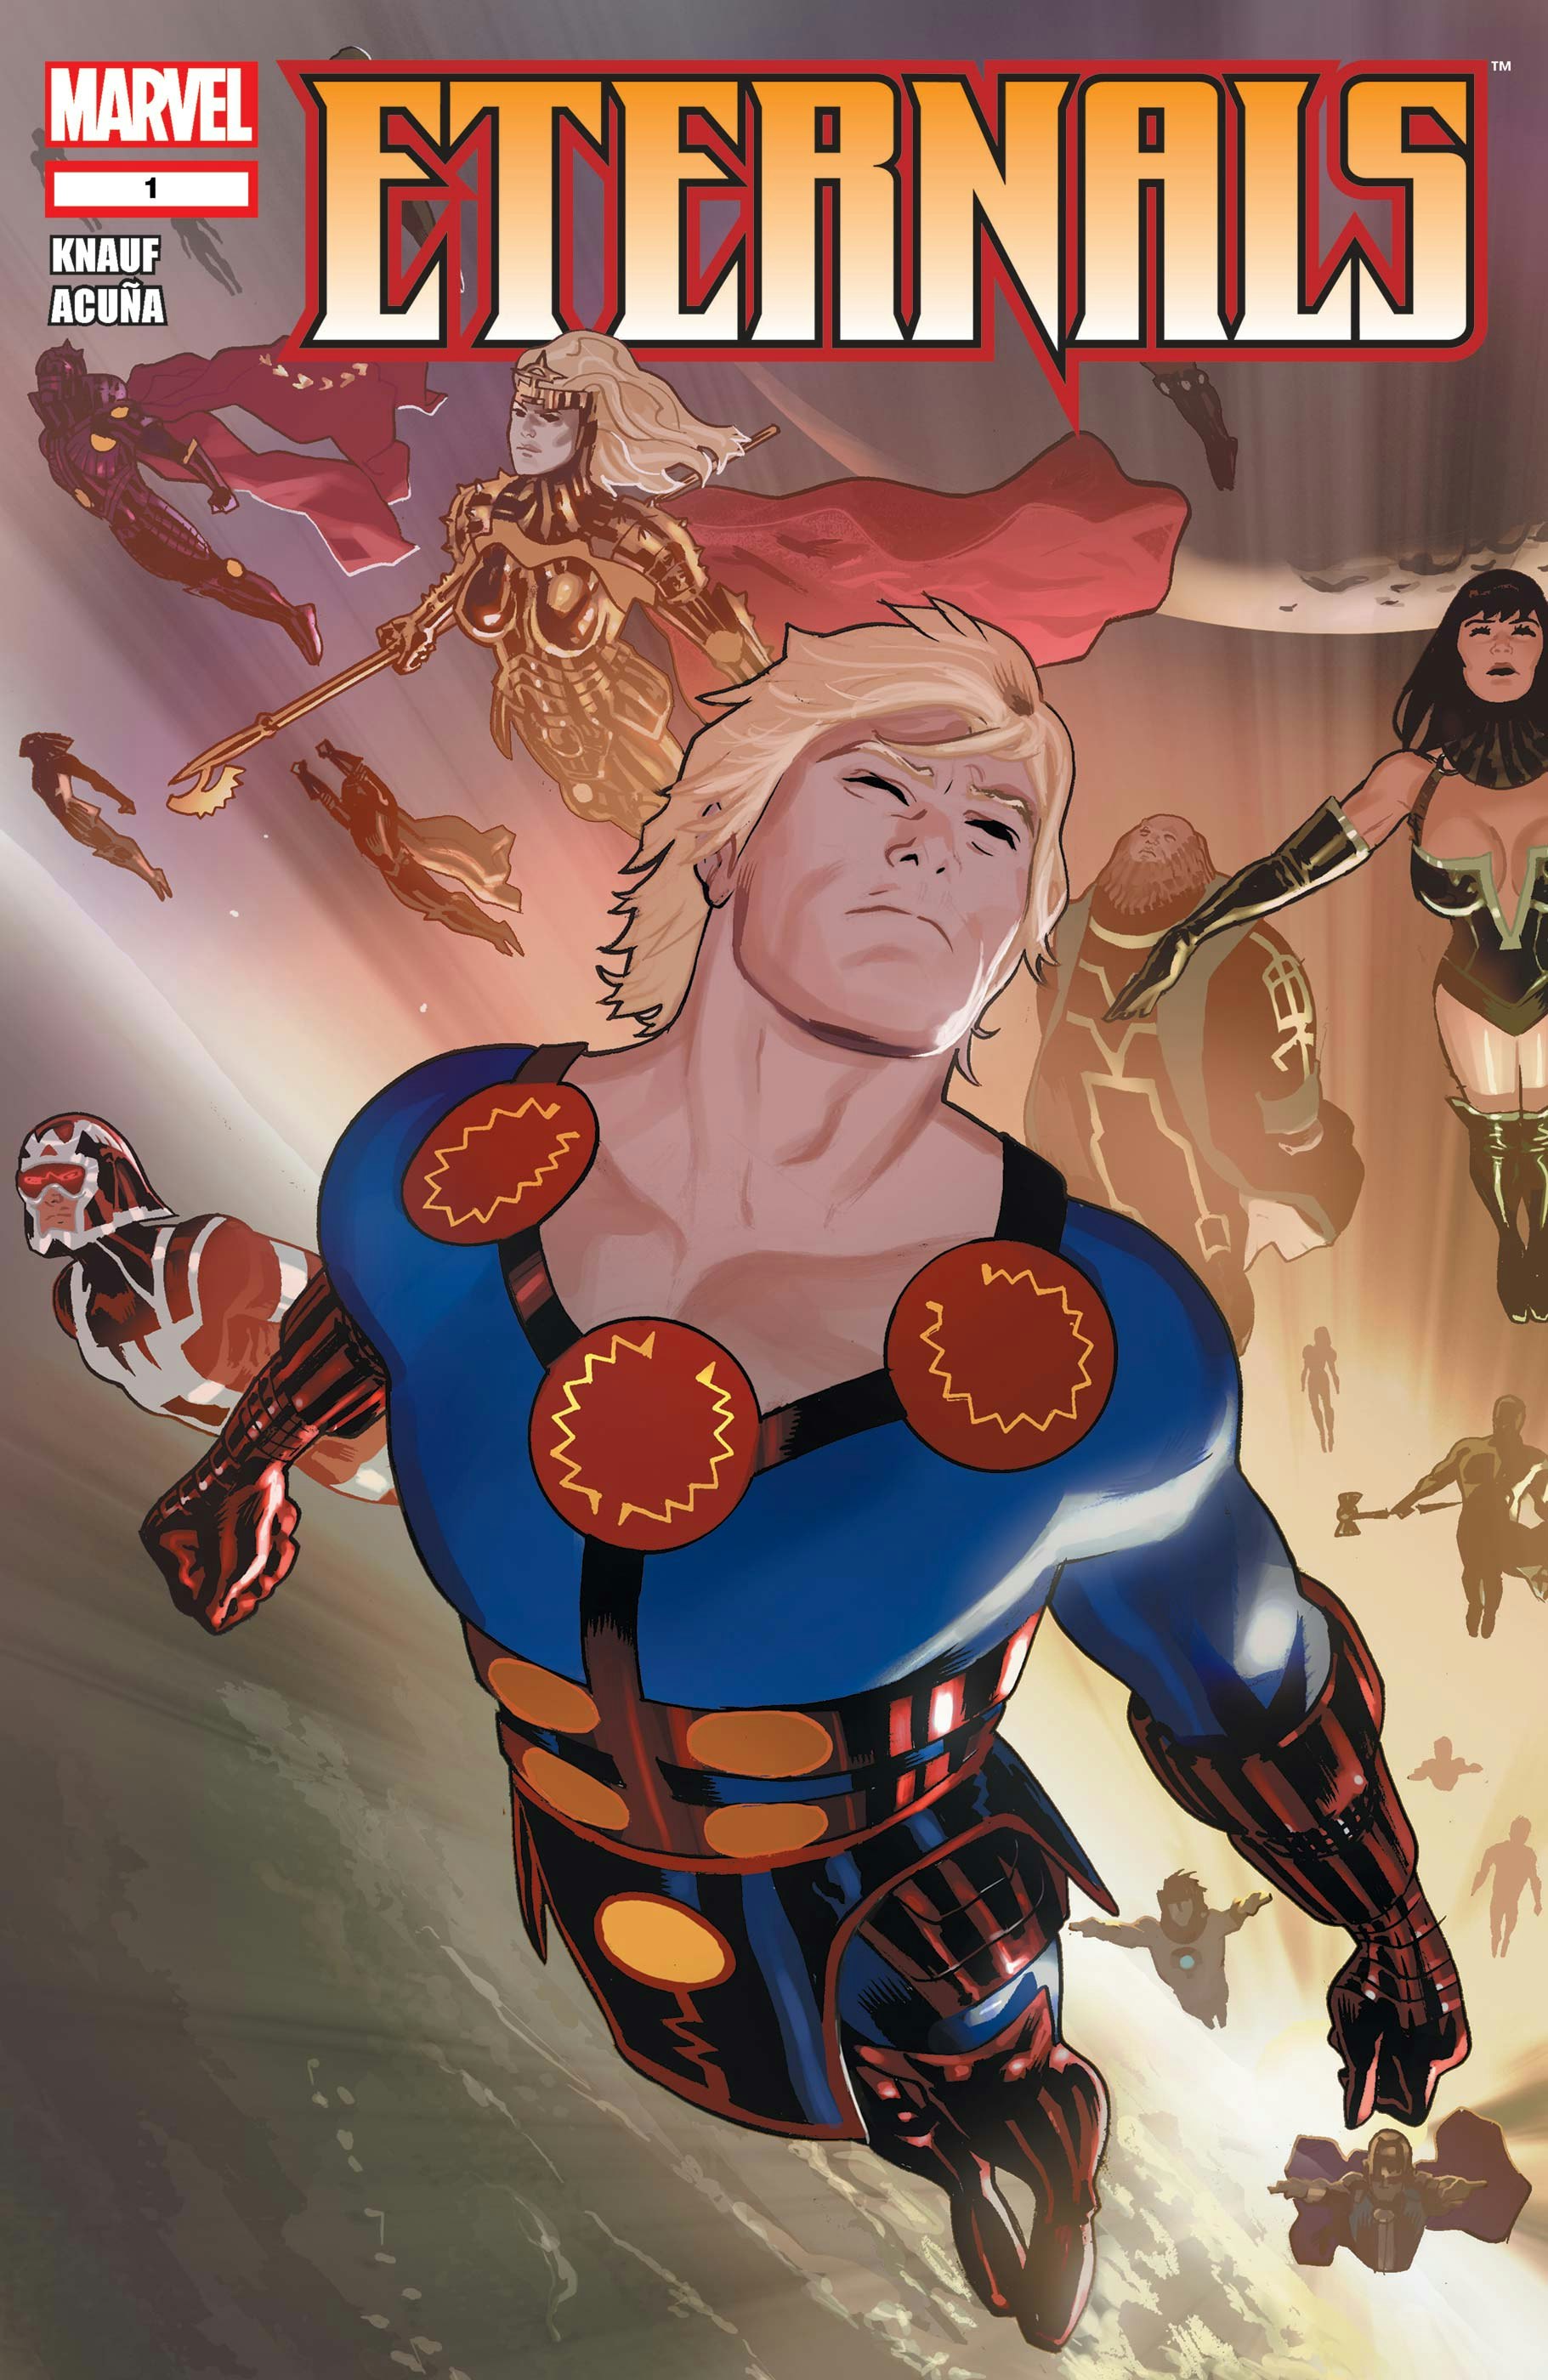 Marvel's 'The Eternals' Could Be the Weirdest Movie in the MCU